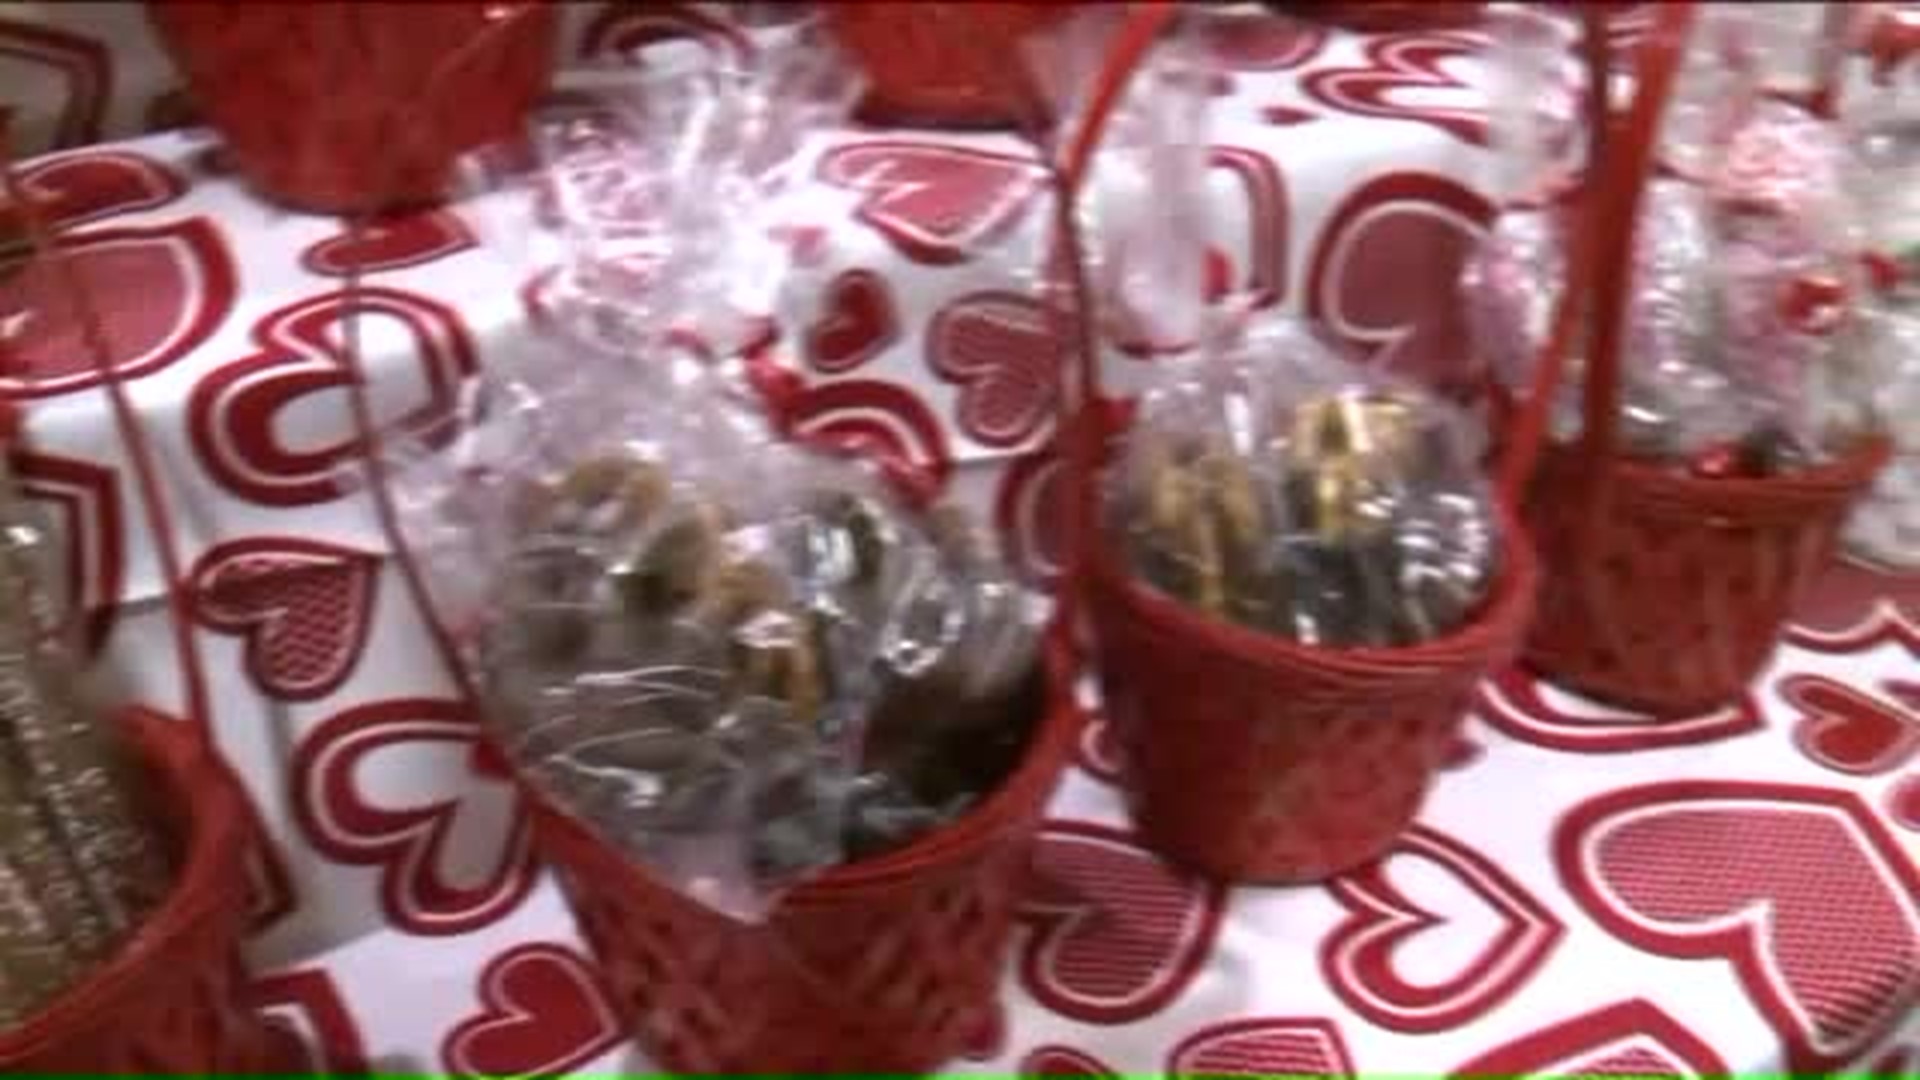 Chocolate event benefits Easter Seals